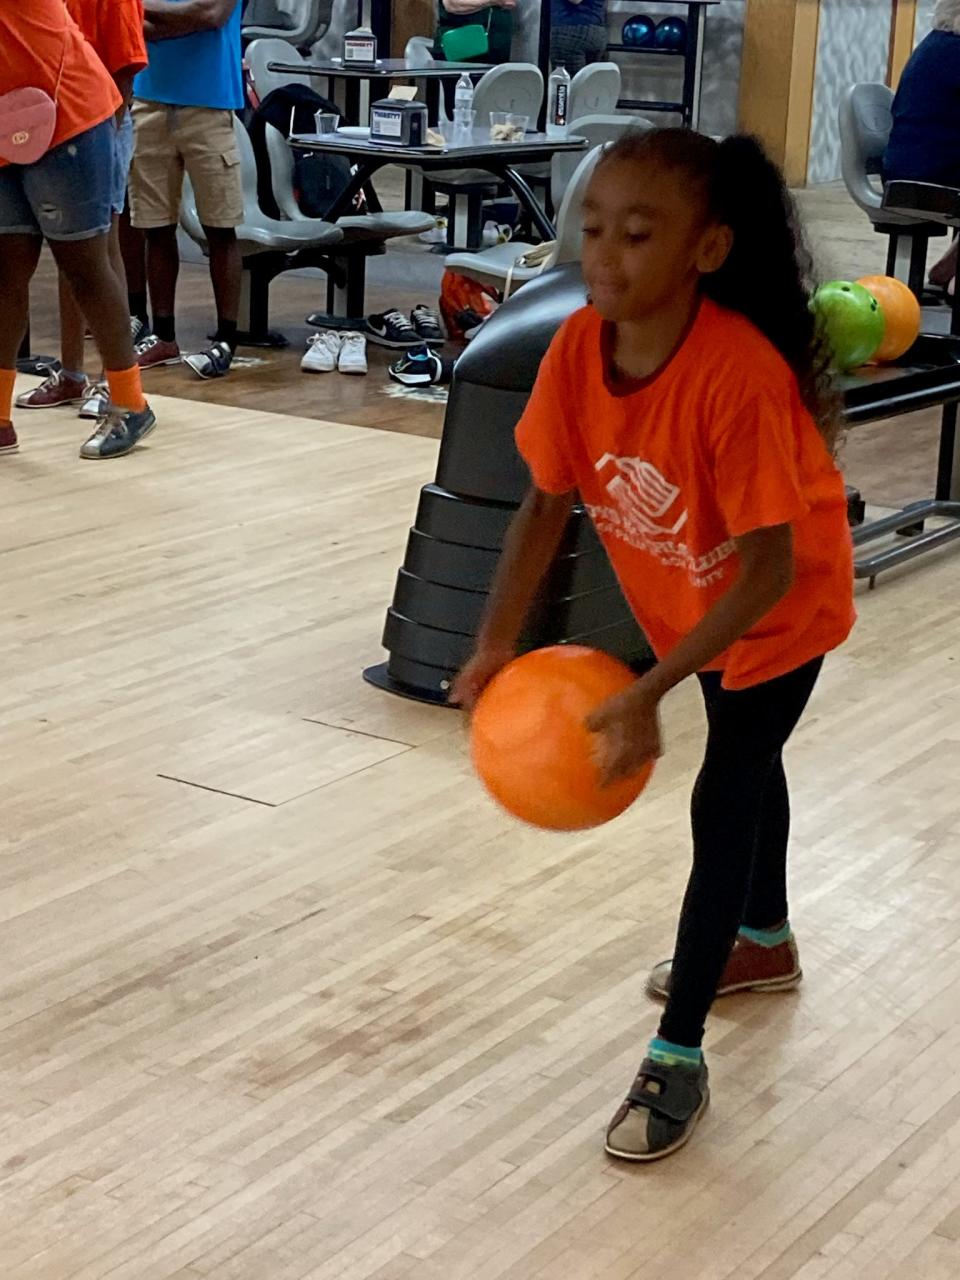 Mia Marmolejos bowls for the first time during Saturday's Florida Sports Hall of Fame event at Greenacres Bowl.